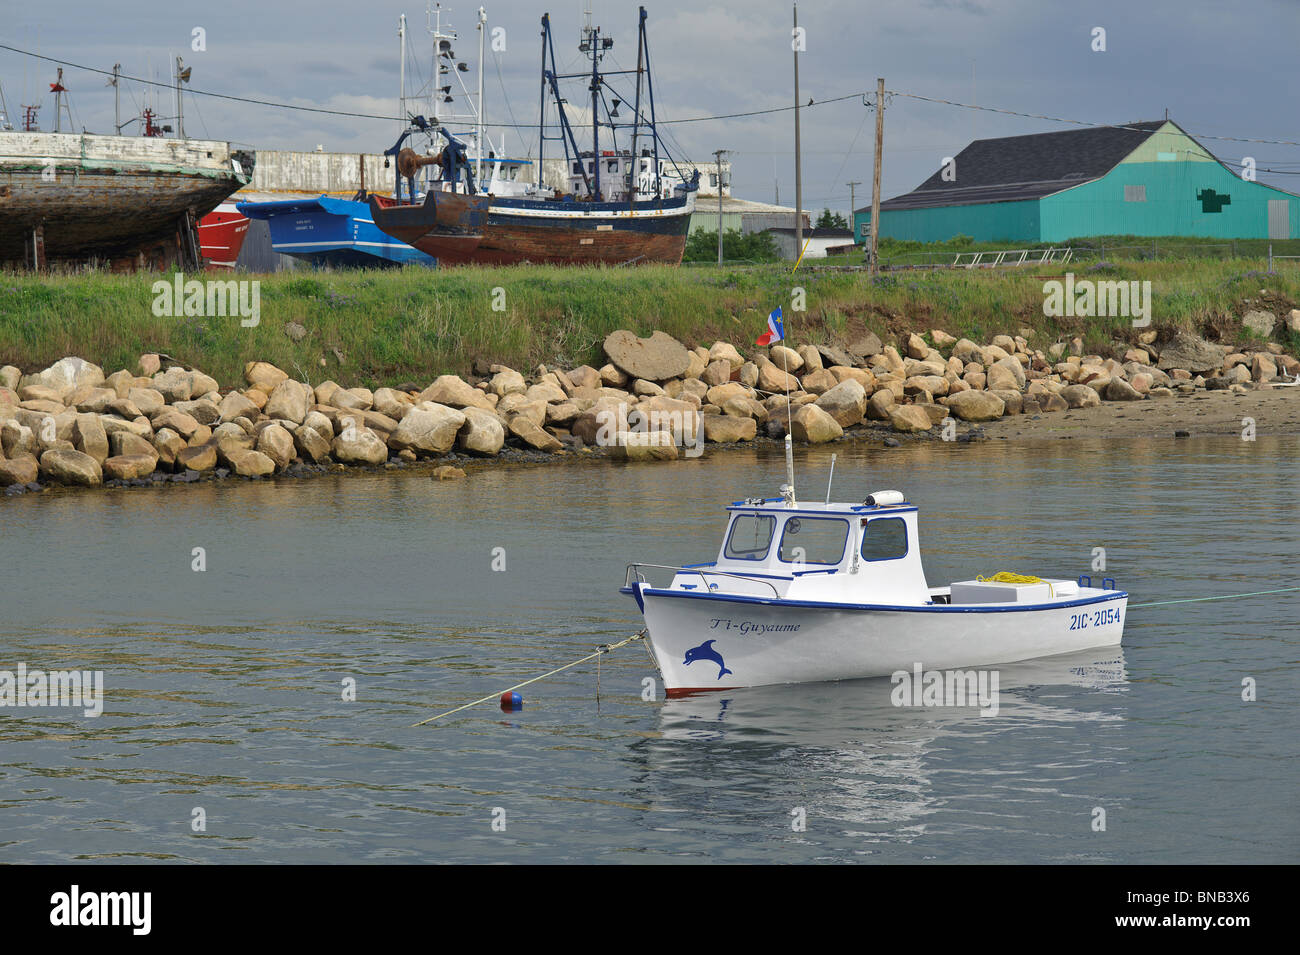 Dry dock and fishing boats in Caraquet New Brunswick Canada Stock Photo